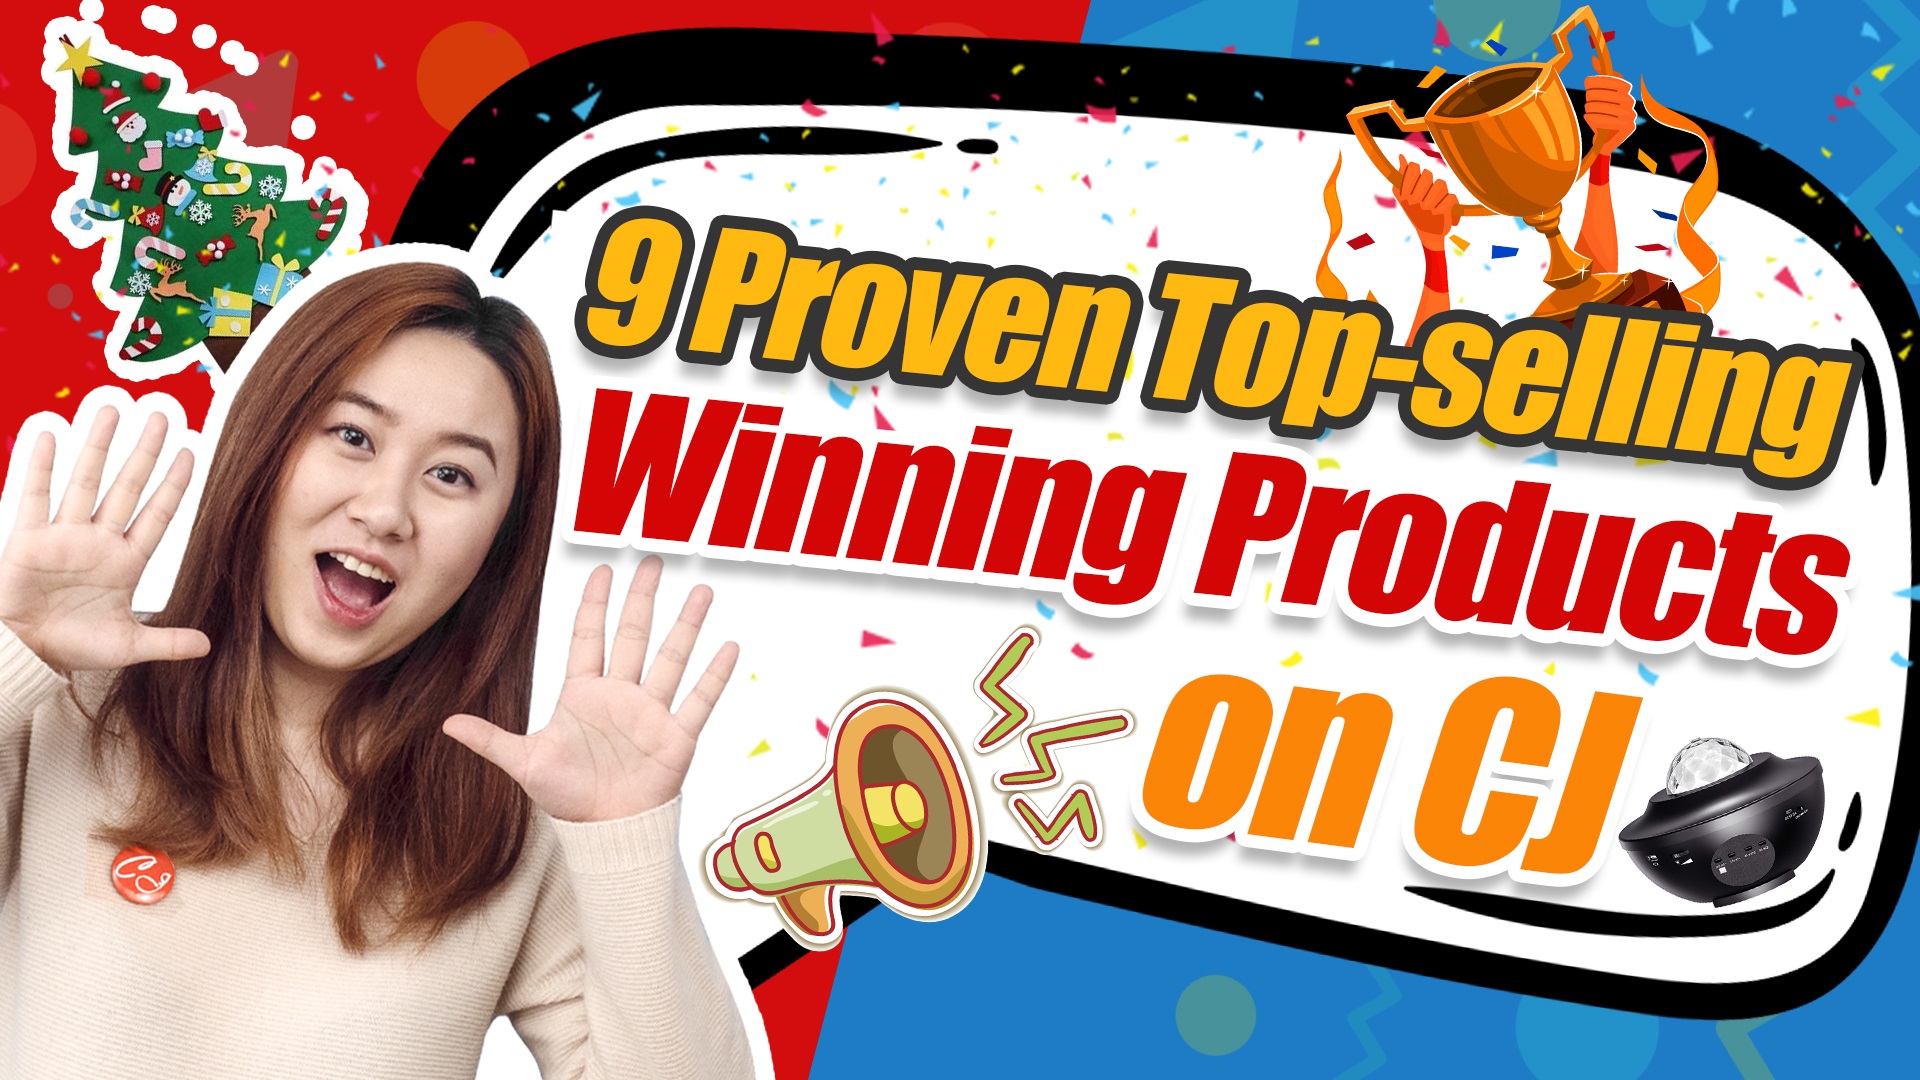 Winning product. Dropshipping winning products. Best product Dropshipping 2020. CJDROPSHIPPING. Winning Beauty products Dropshipping.